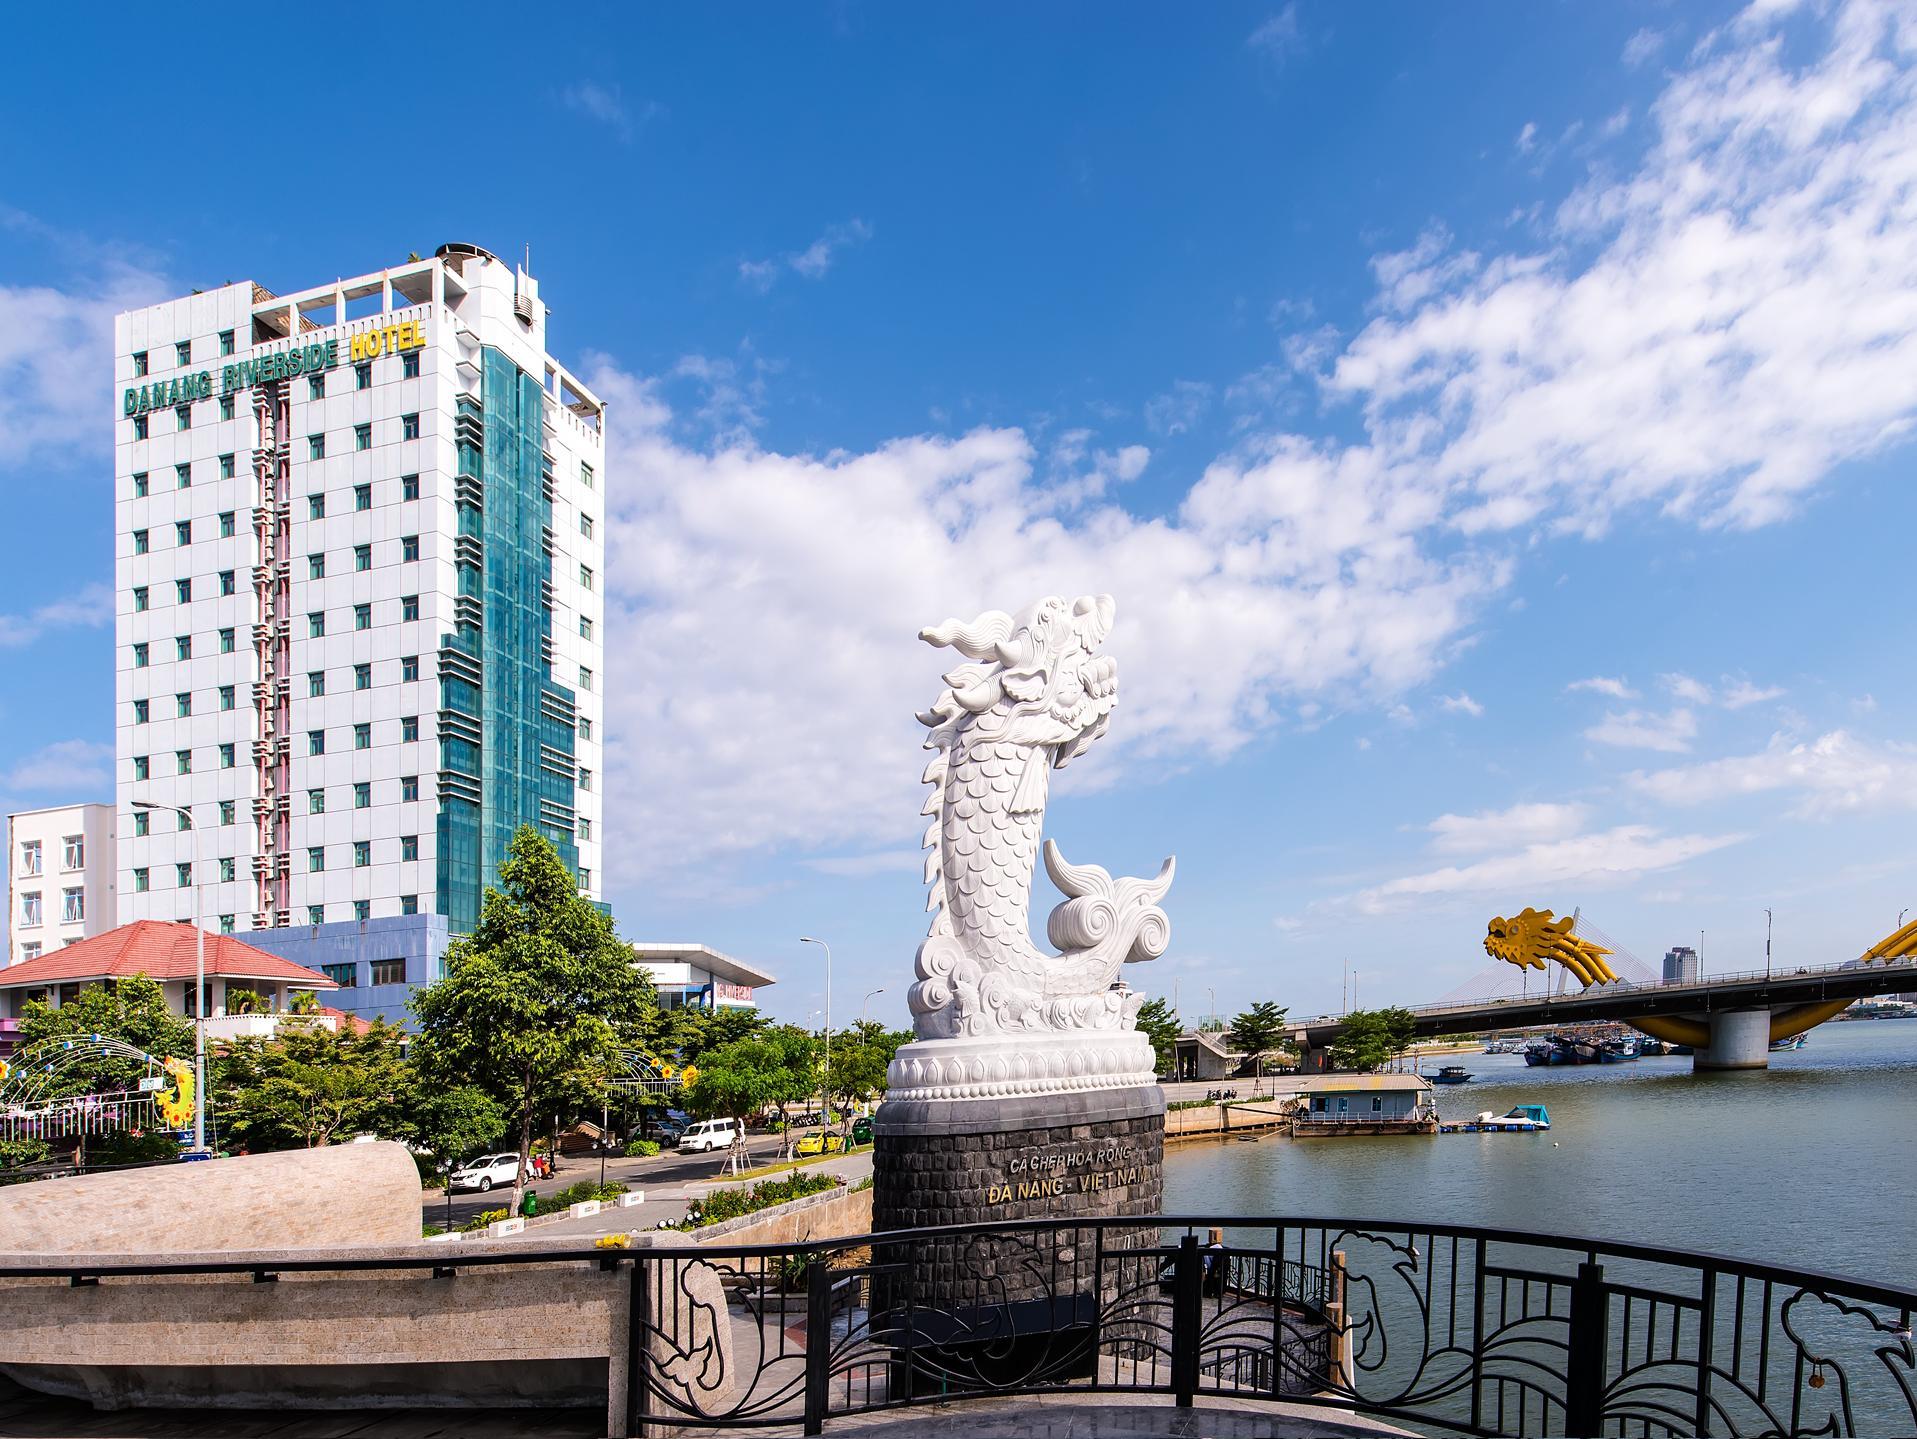 Da Nang Riverside Hotel Madagascar
 FAQ 2016, What facilities are there in Da Nang Riverside Hotel Madagascar
 2016, What Languages Spoken are Supported in Da Nang Riverside Hotel Madagascar
 2016, Which payment cards are accepted in Da Nang Riverside Hotel Madagascar
 , Madagascar
 Da Nang Riverside Hotel room facilities and services Q&A 2016, Madagascar
 Da Nang Riverside Hotel online booking services 2016, Madagascar
 Da Nang Riverside Hotel address 2016, Madagascar
 Da Nang Riverside Hotel telephone number 2016,Madagascar
 Da Nang Riverside Hotel map 2016, Madagascar
 Da Nang Riverside Hotel traffic guide 2016, how to go Madagascar
 Da Nang Riverside Hotel, Madagascar
 Da Nang Riverside Hotel booking online 2016, Madagascar
 Da Nang Riverside Hotel room types 2016.